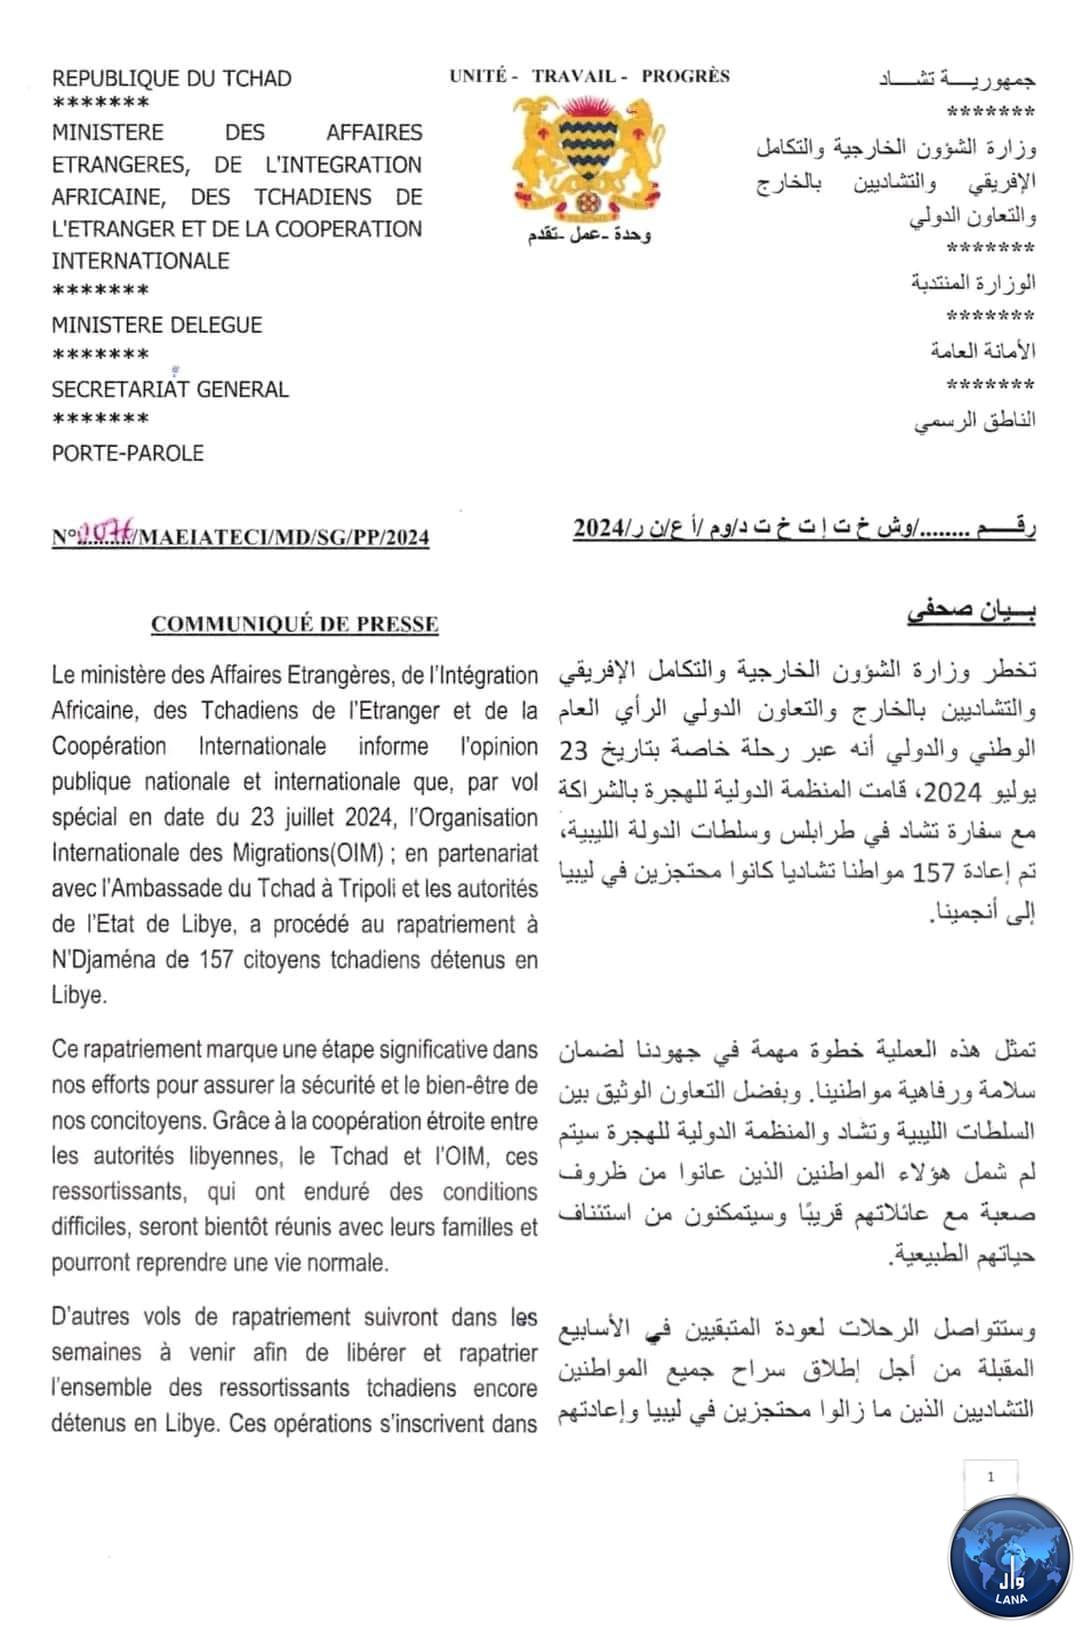 The Chadian authorities announce the return of (157) Chadians after their deportation from Libya.